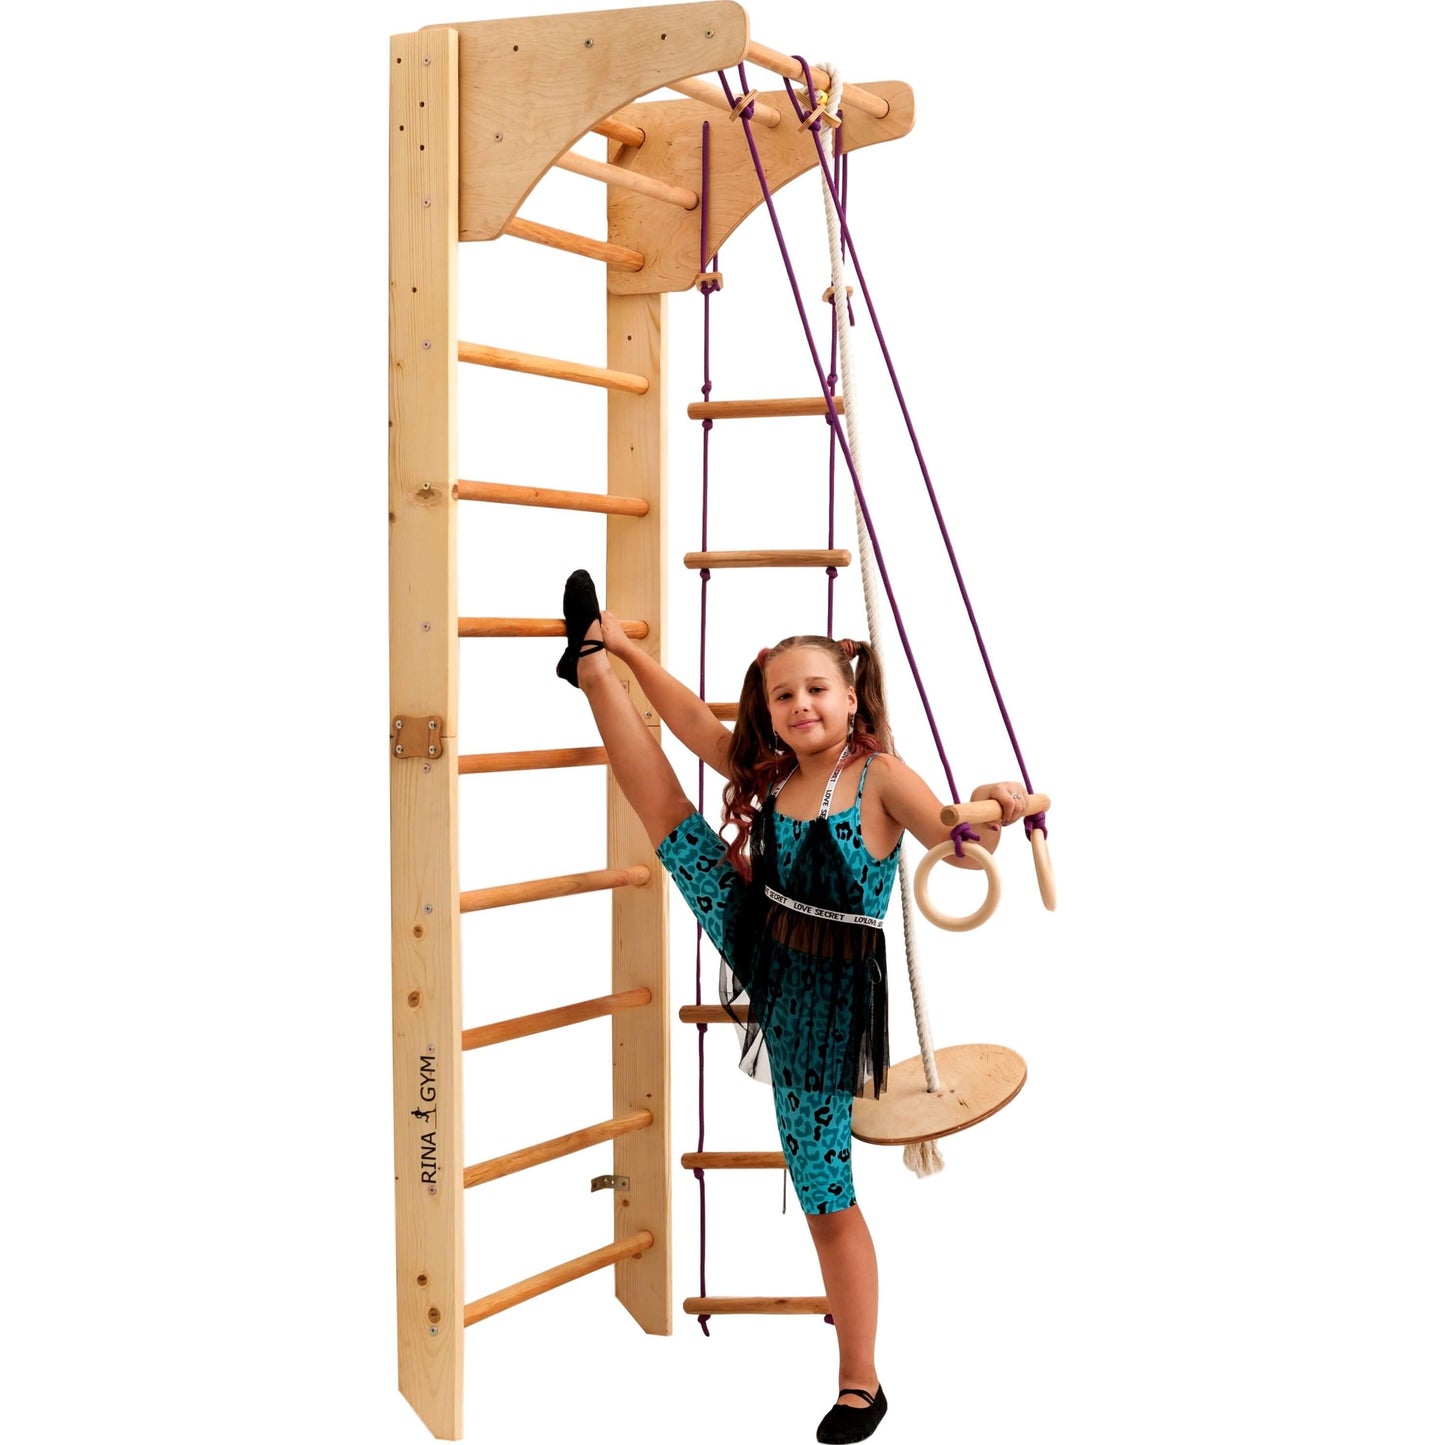 Climbing wall HANNAH for children, different colors